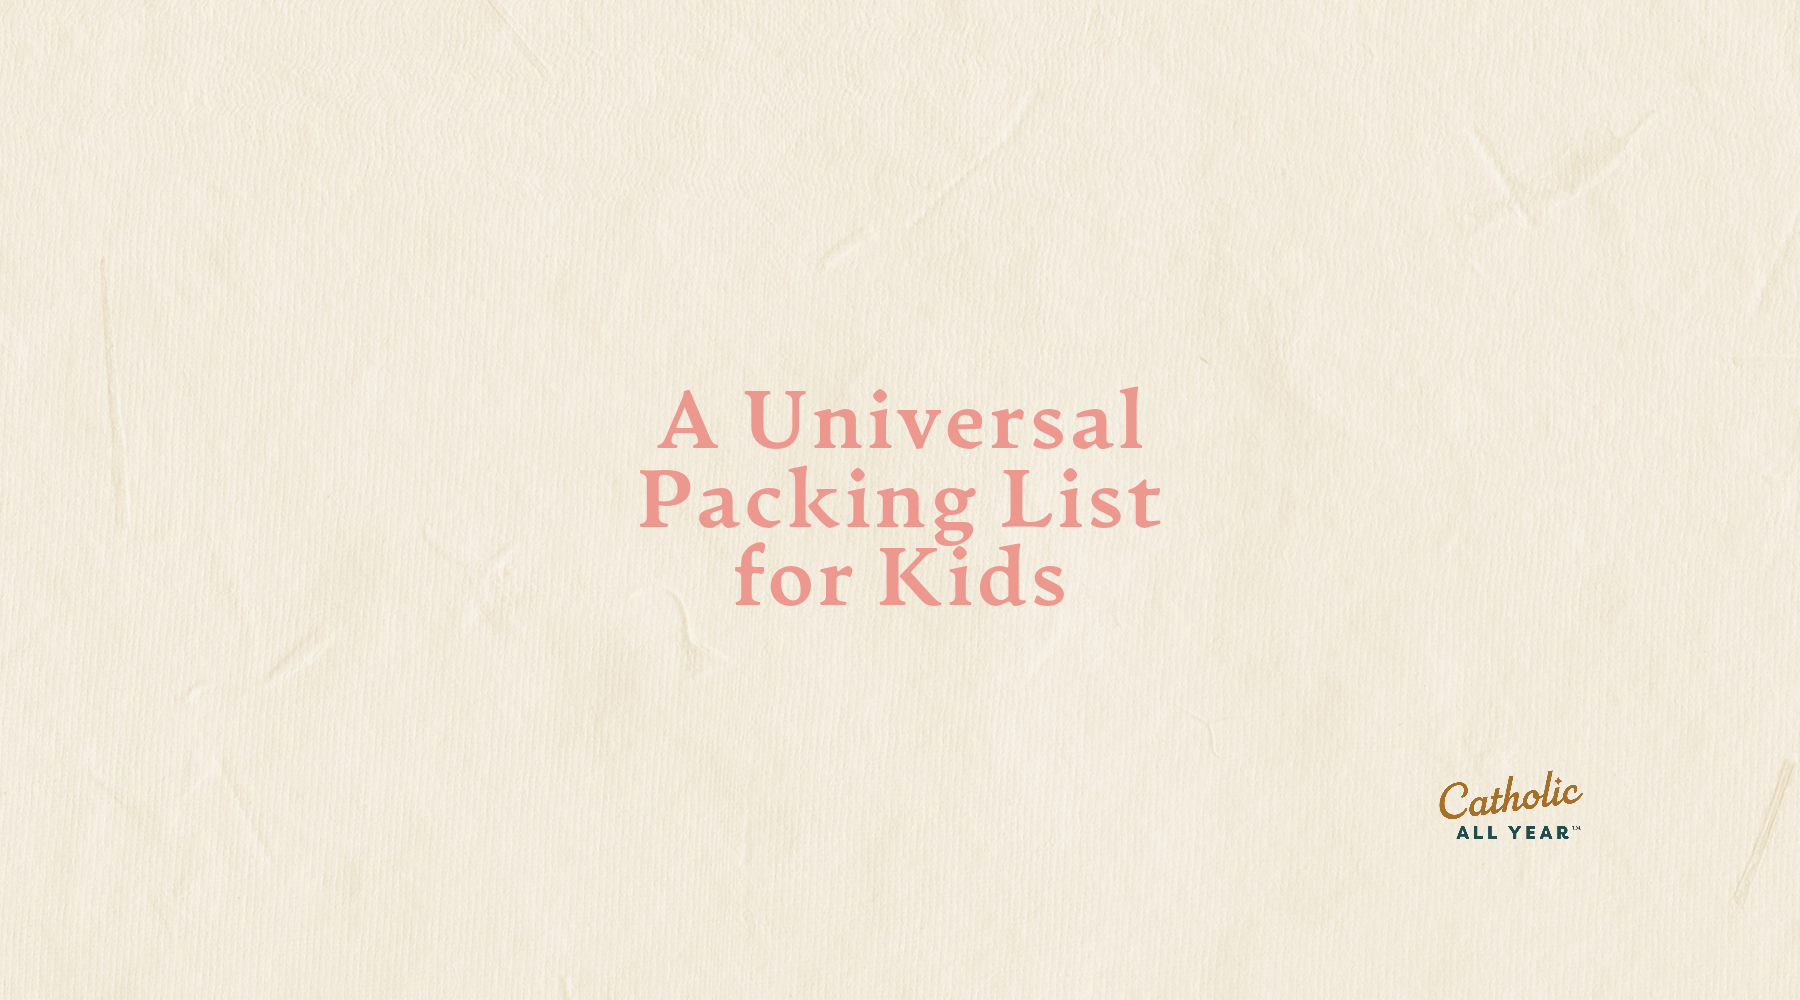 A Universal Packing List for Kids